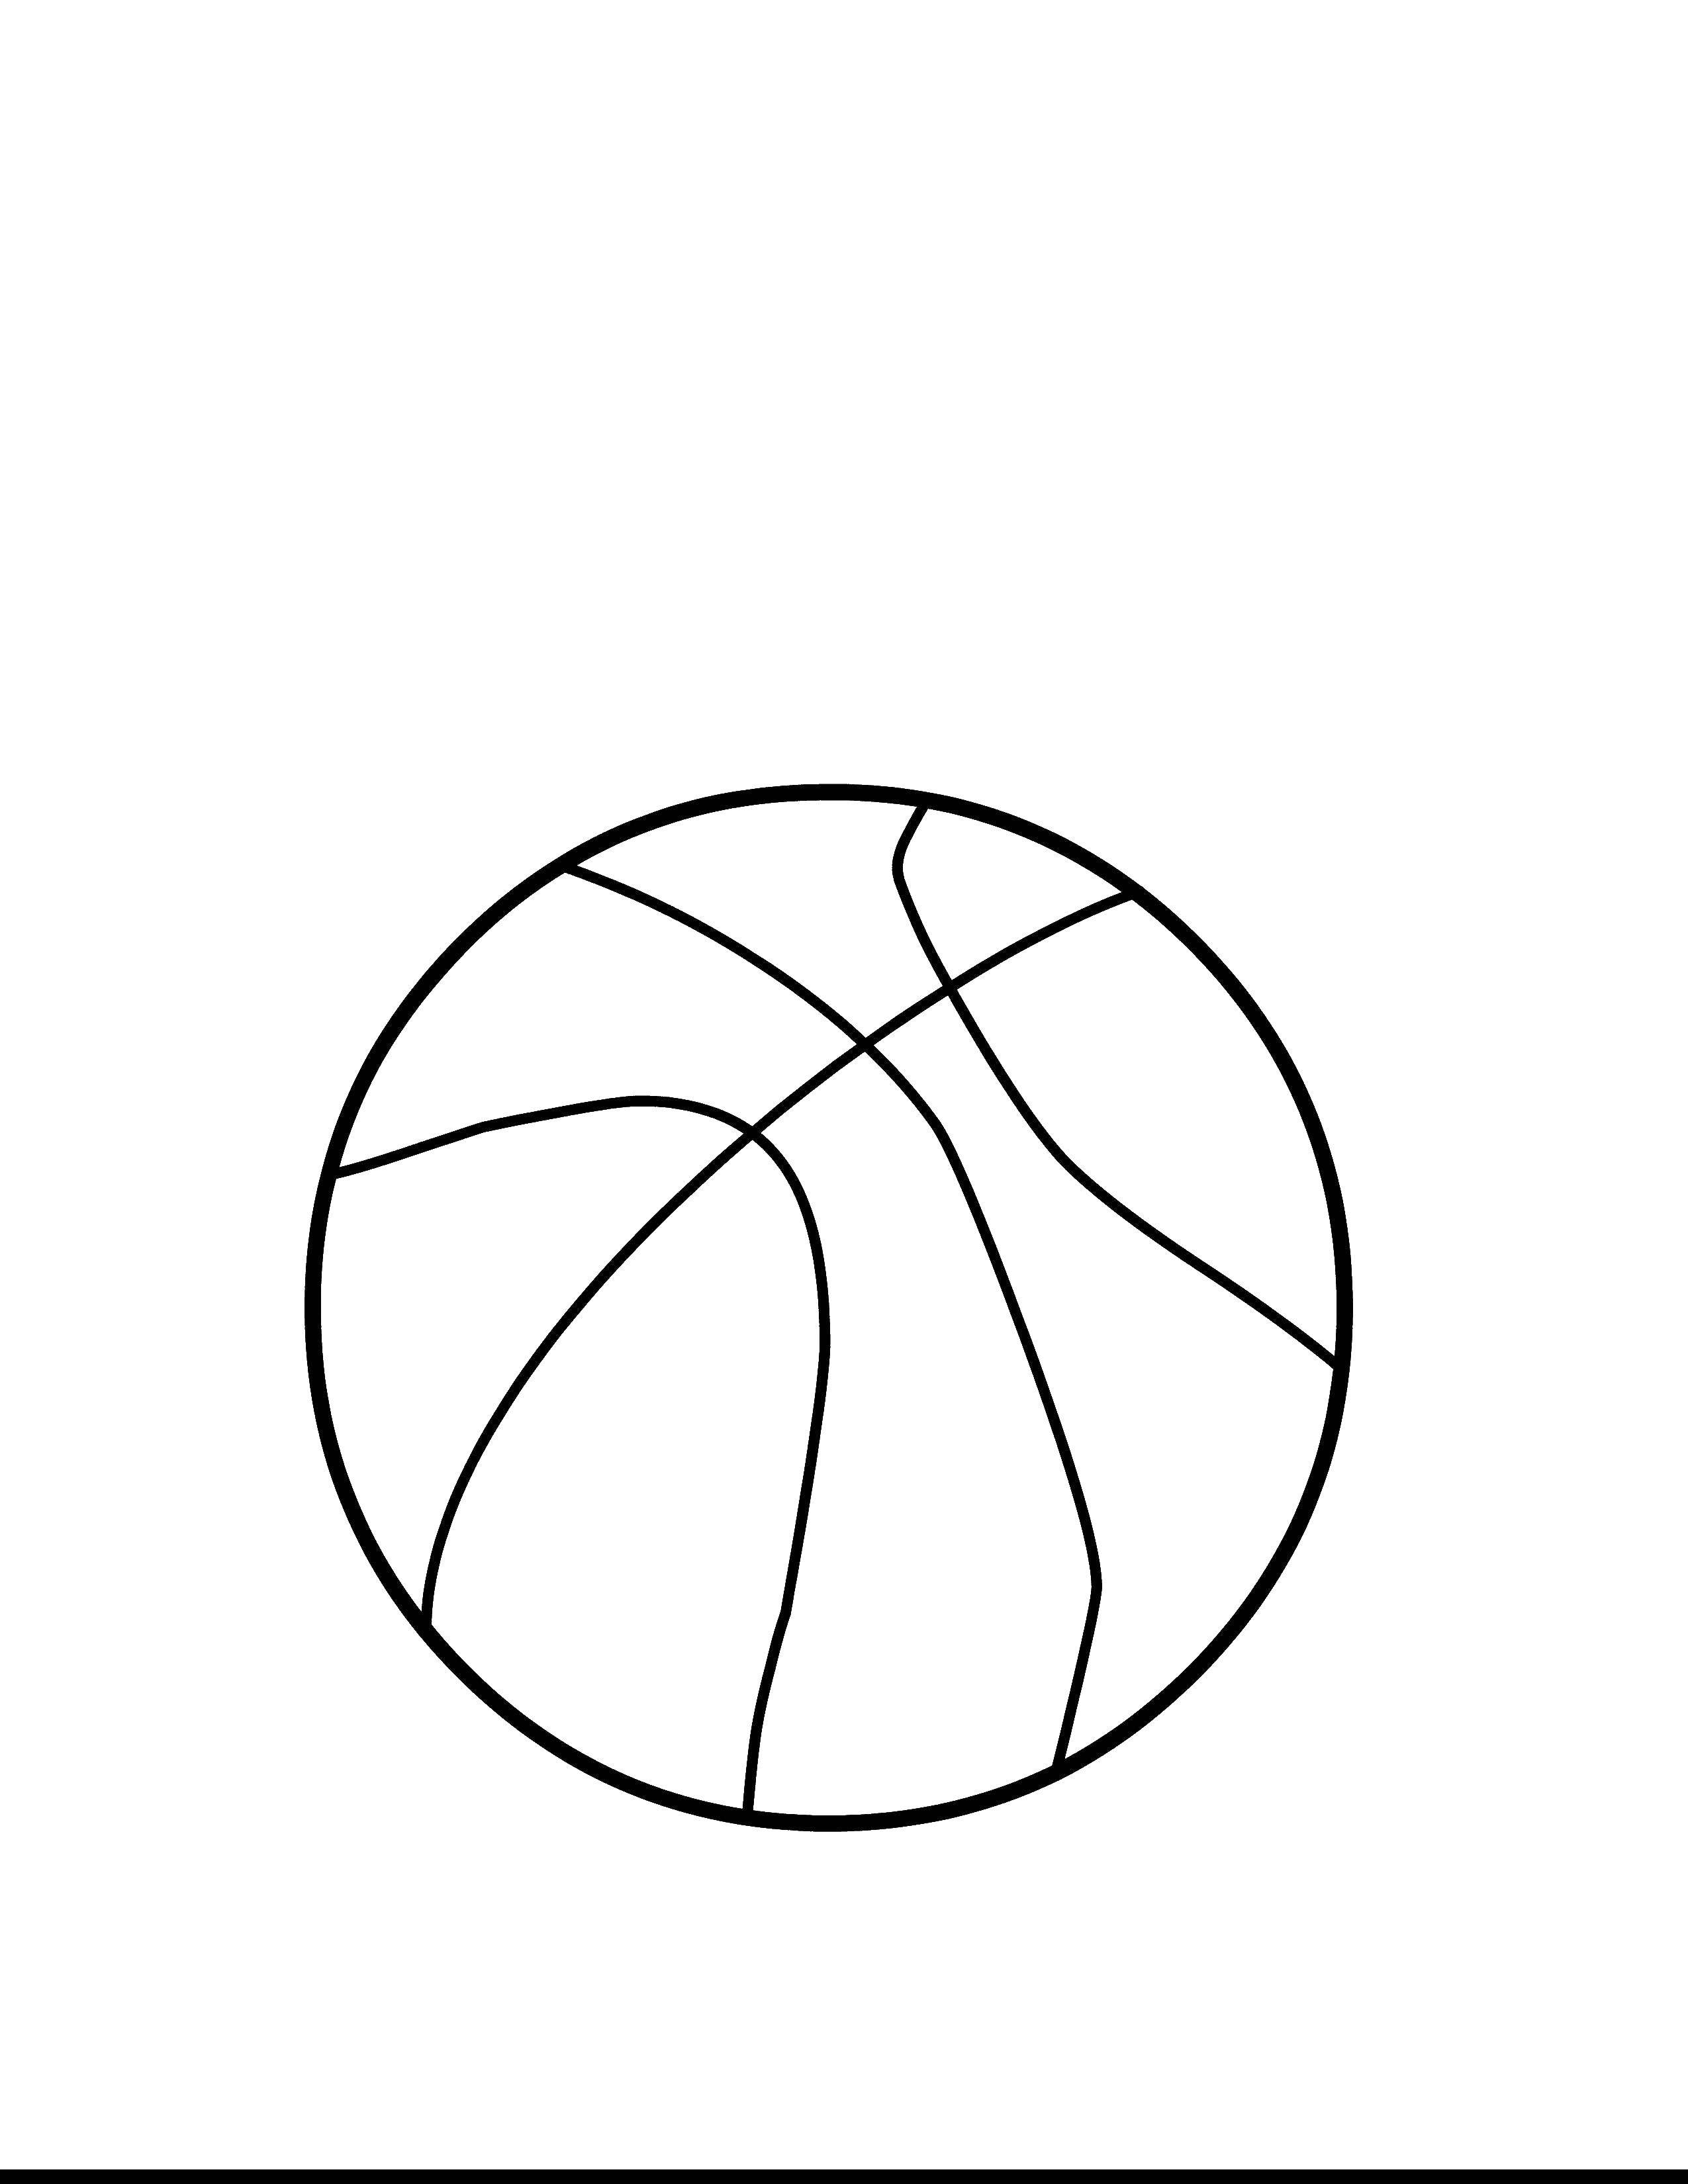 Coloring Basketball. Category Sports. Tags:  sports, basketball.